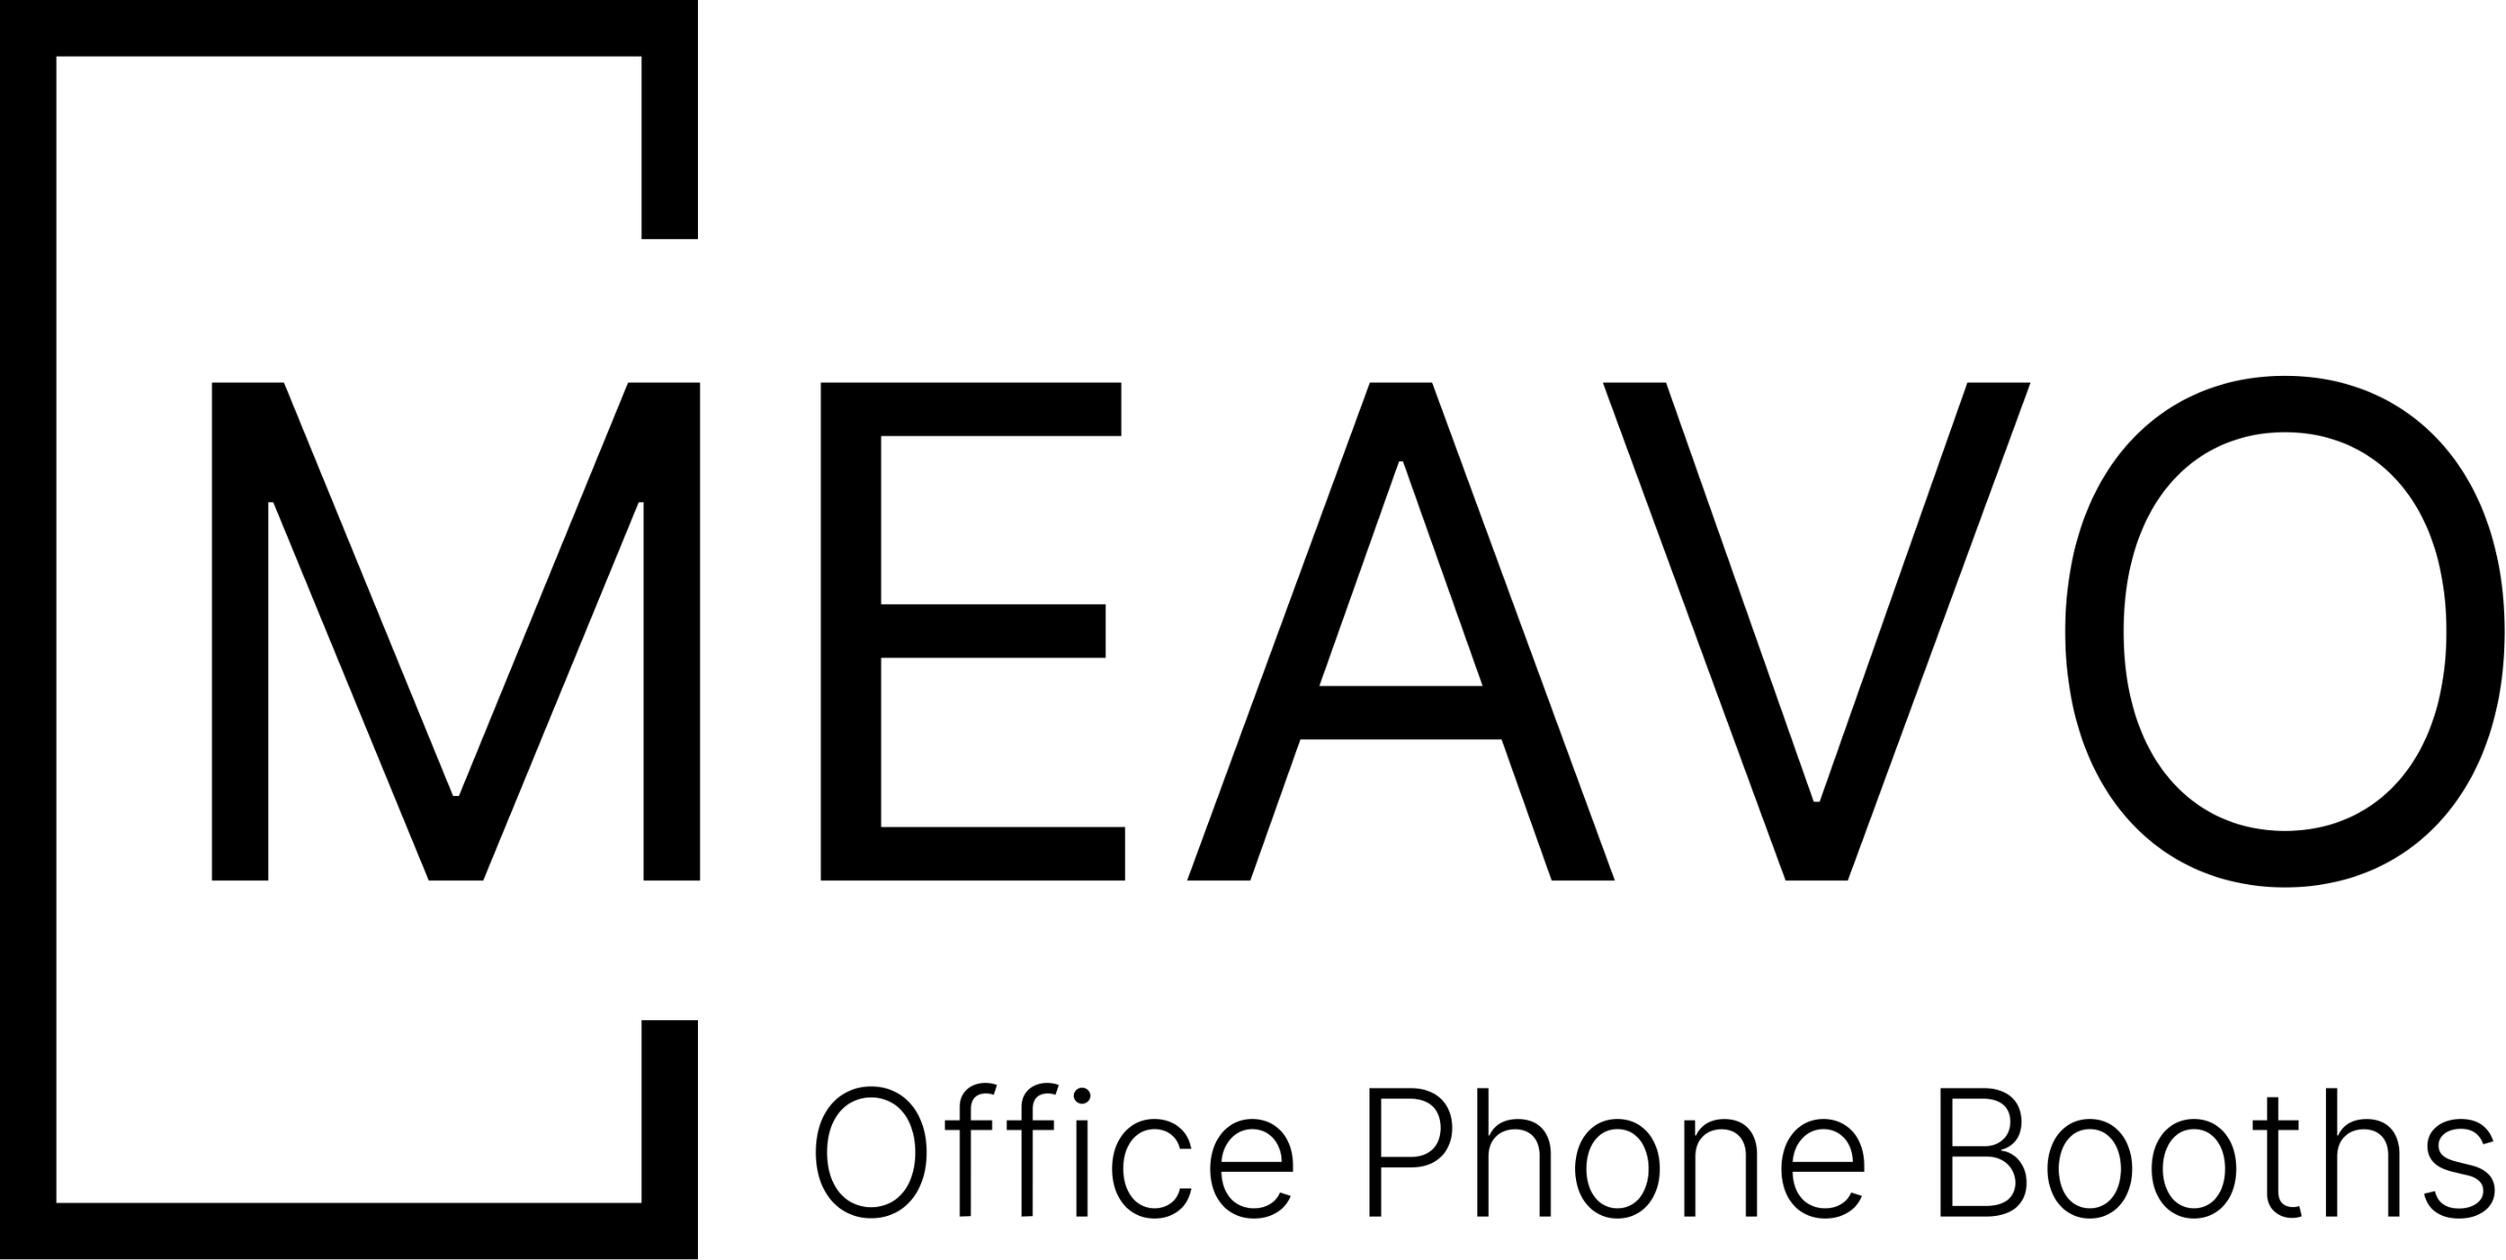 Meavo Office Phone Booths Logo